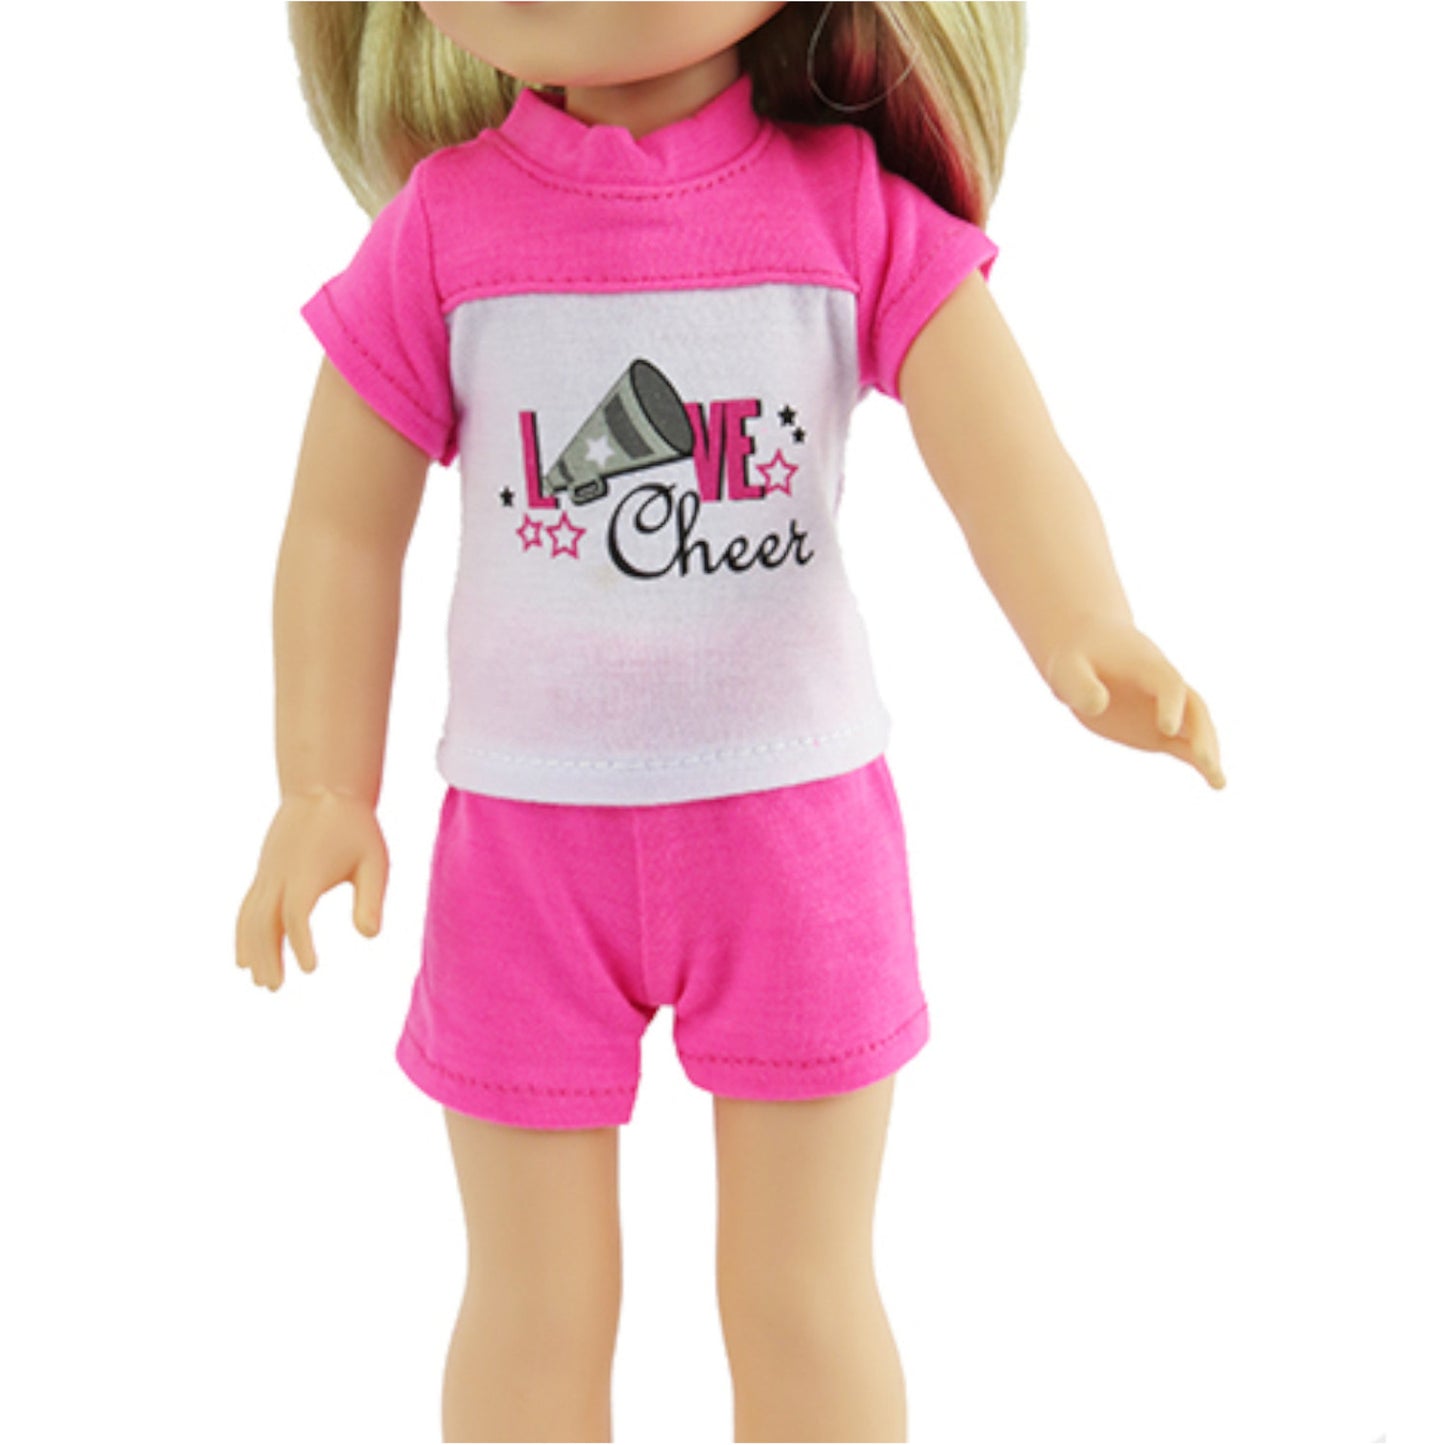 Love Cheer Pant Set for 14 1/2-inch dolls with doll